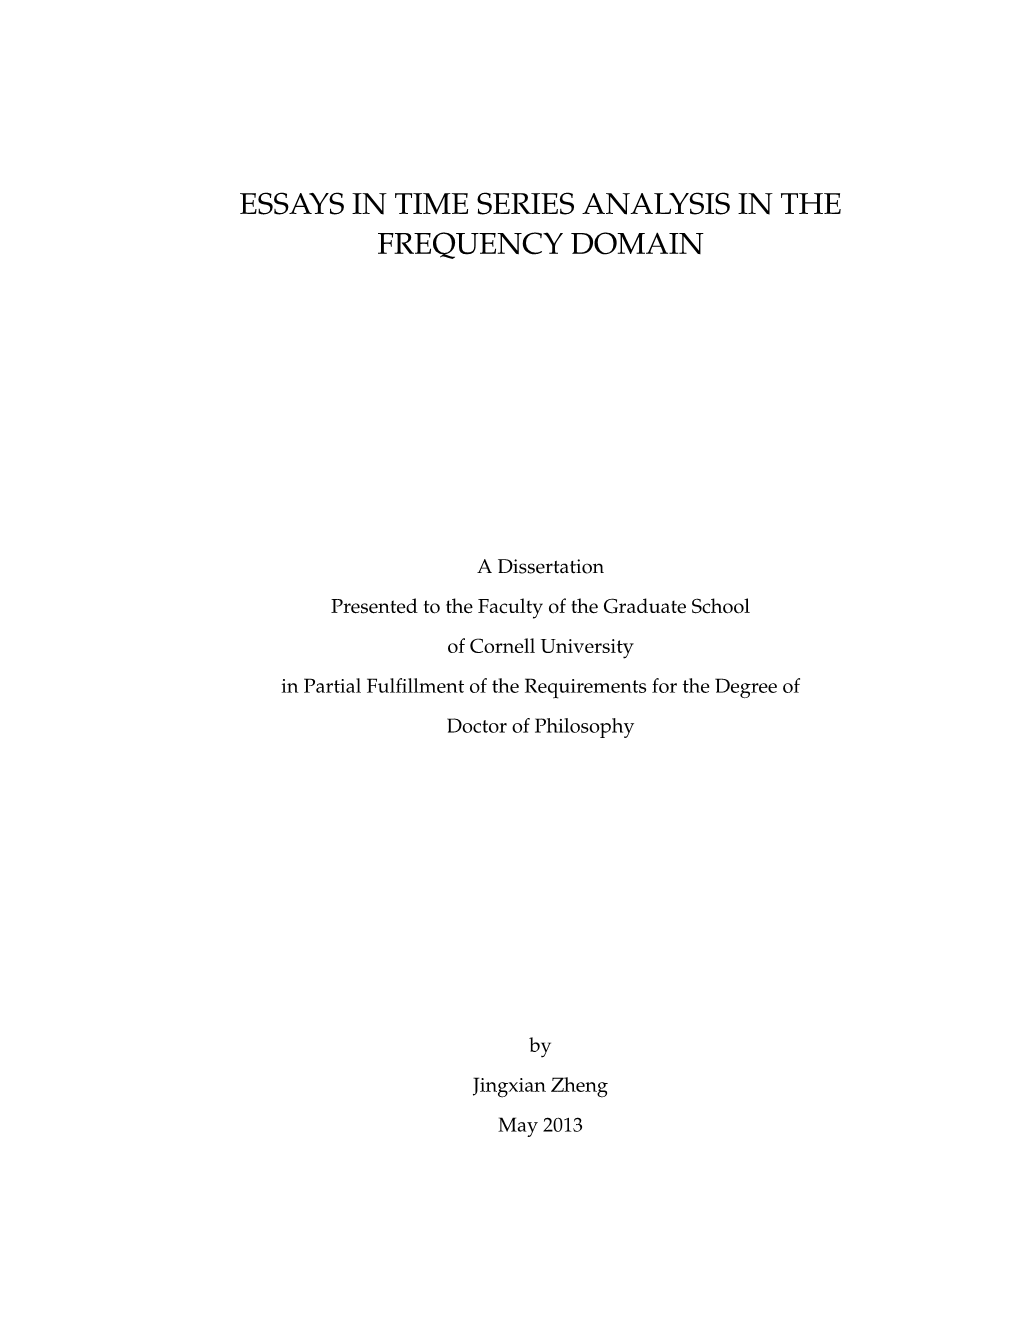 Essays in Time Series Analysis in the Frequency Domain